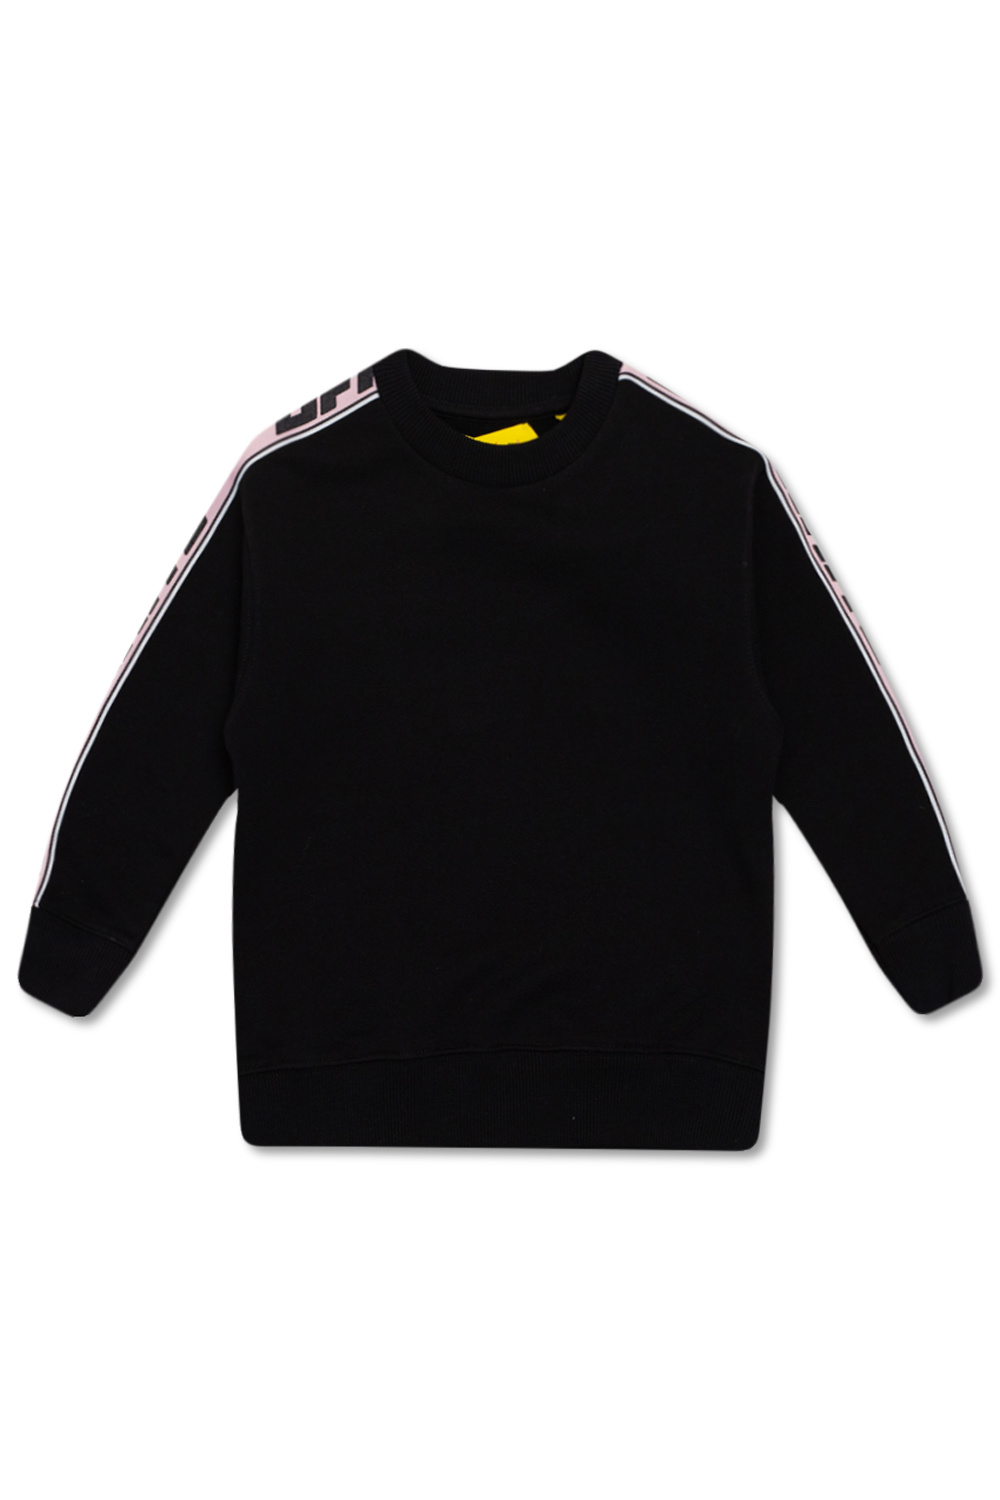 Off-White Kids sweatshirt embroidered-back with logo